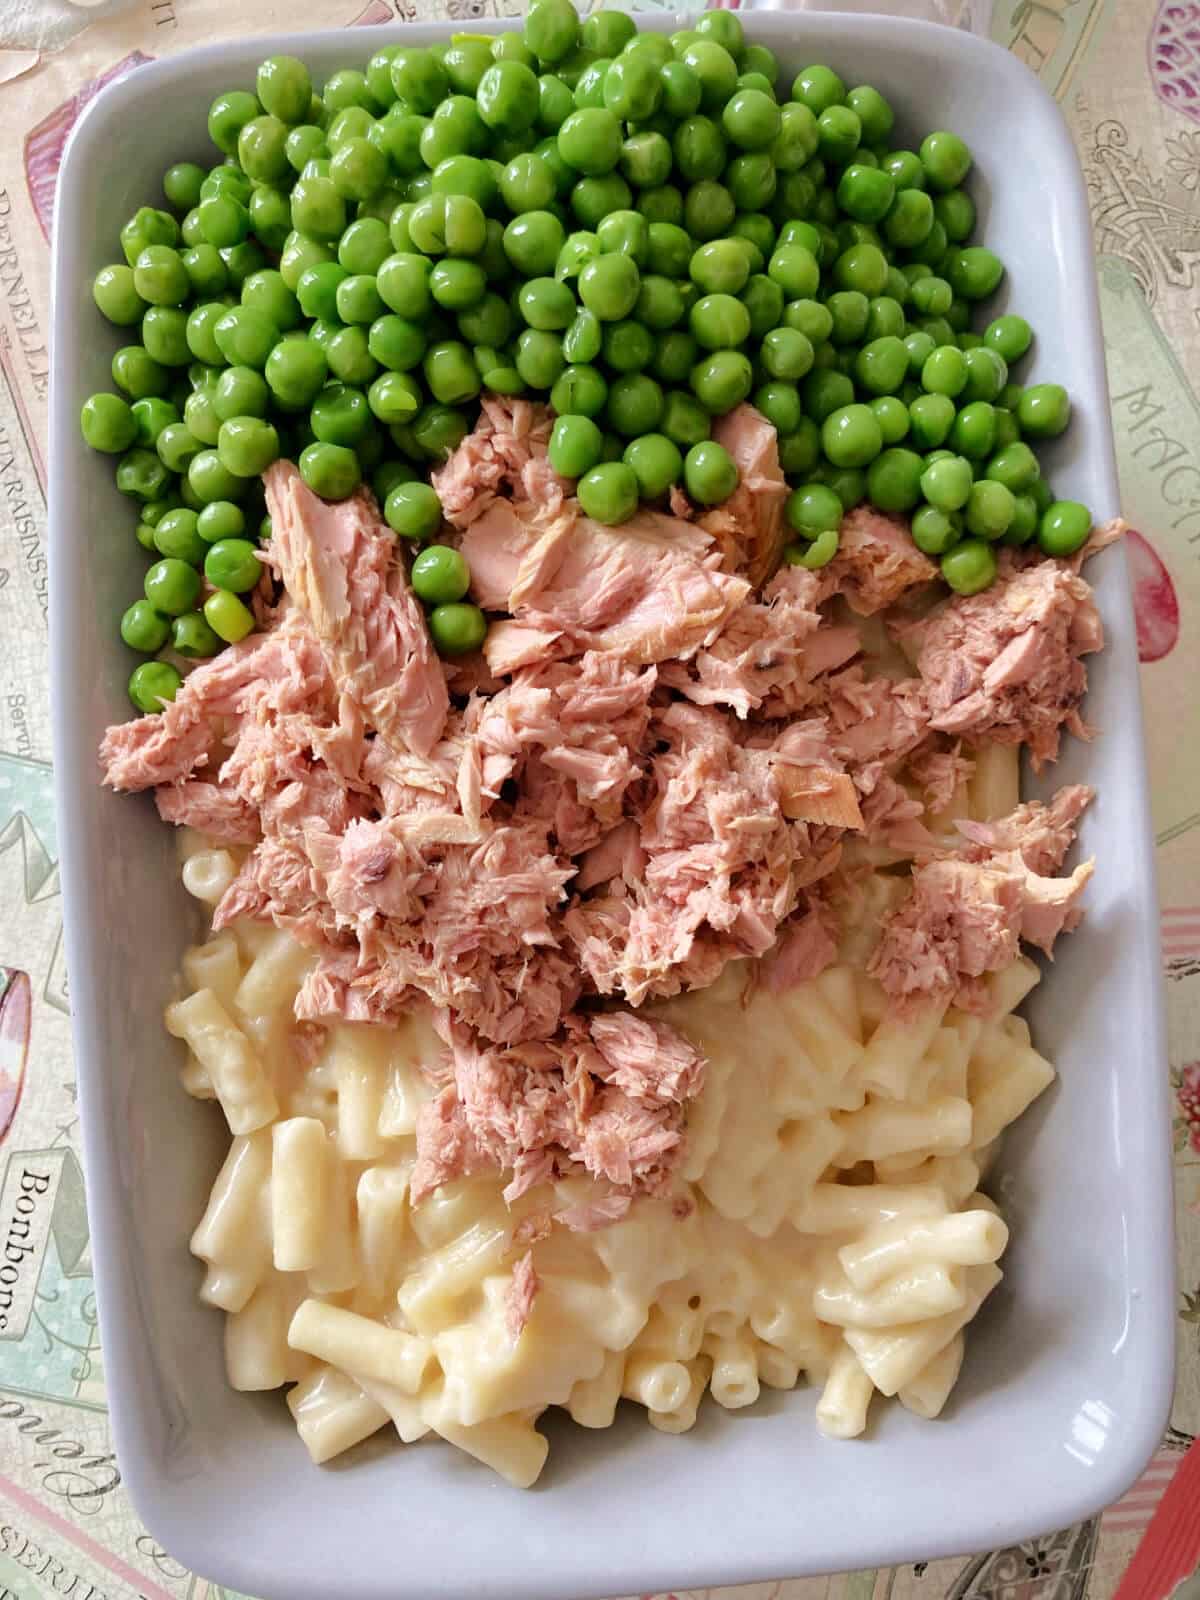 Overhead shoot of a dish with pasta, peas and tuna.